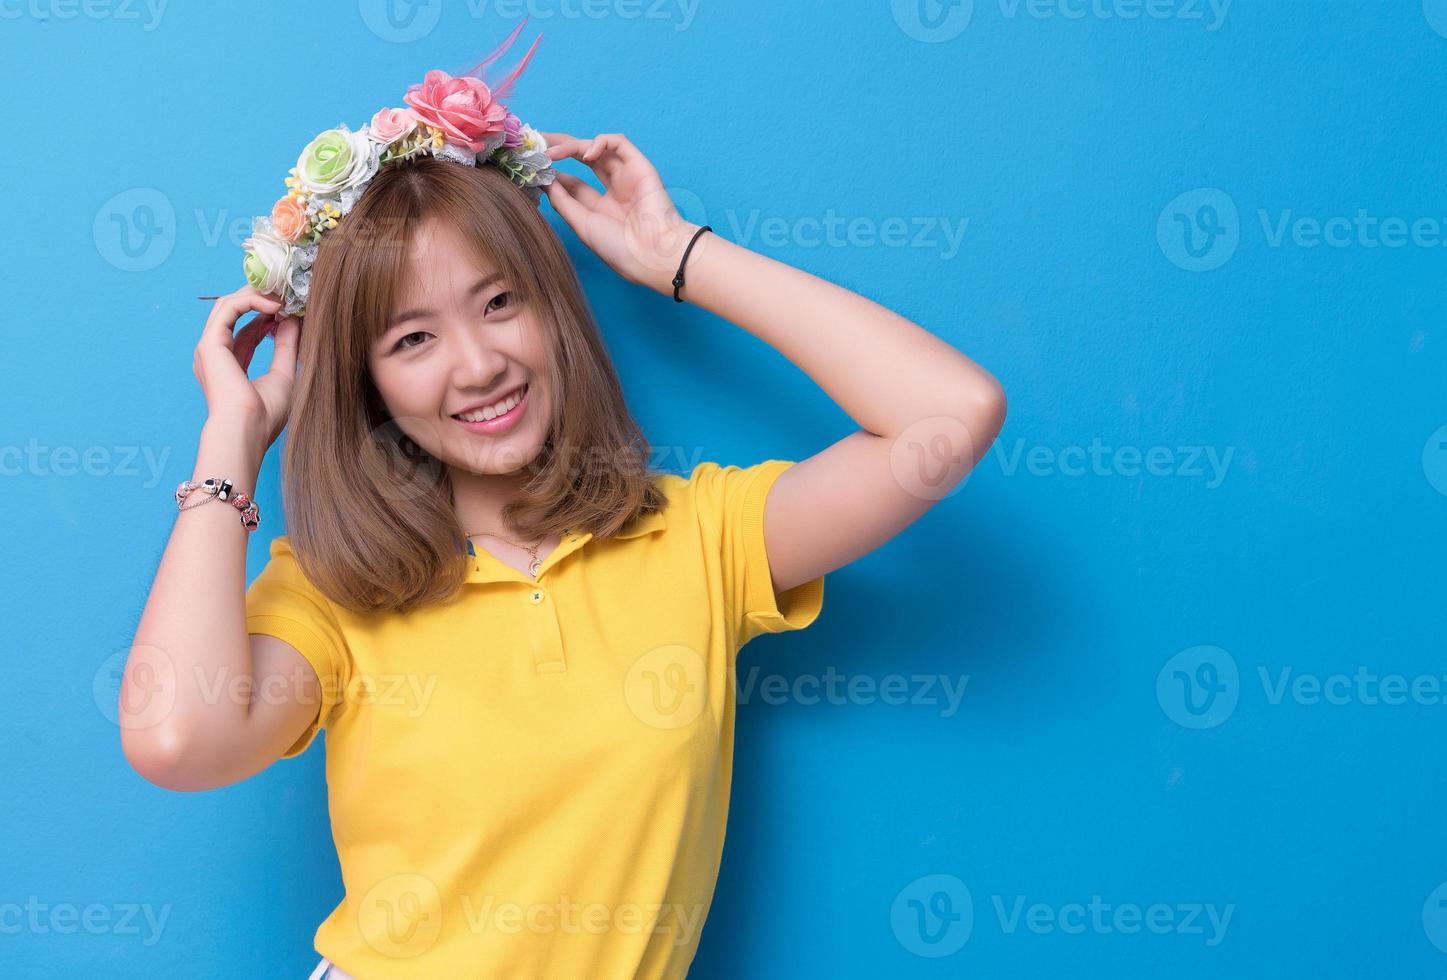 Beauty woman posing with flower hat in front of blue wall background. Summer and vintage concept. Happiness lifestyle and people portrait theme. Cute gesture and pastel tone photo